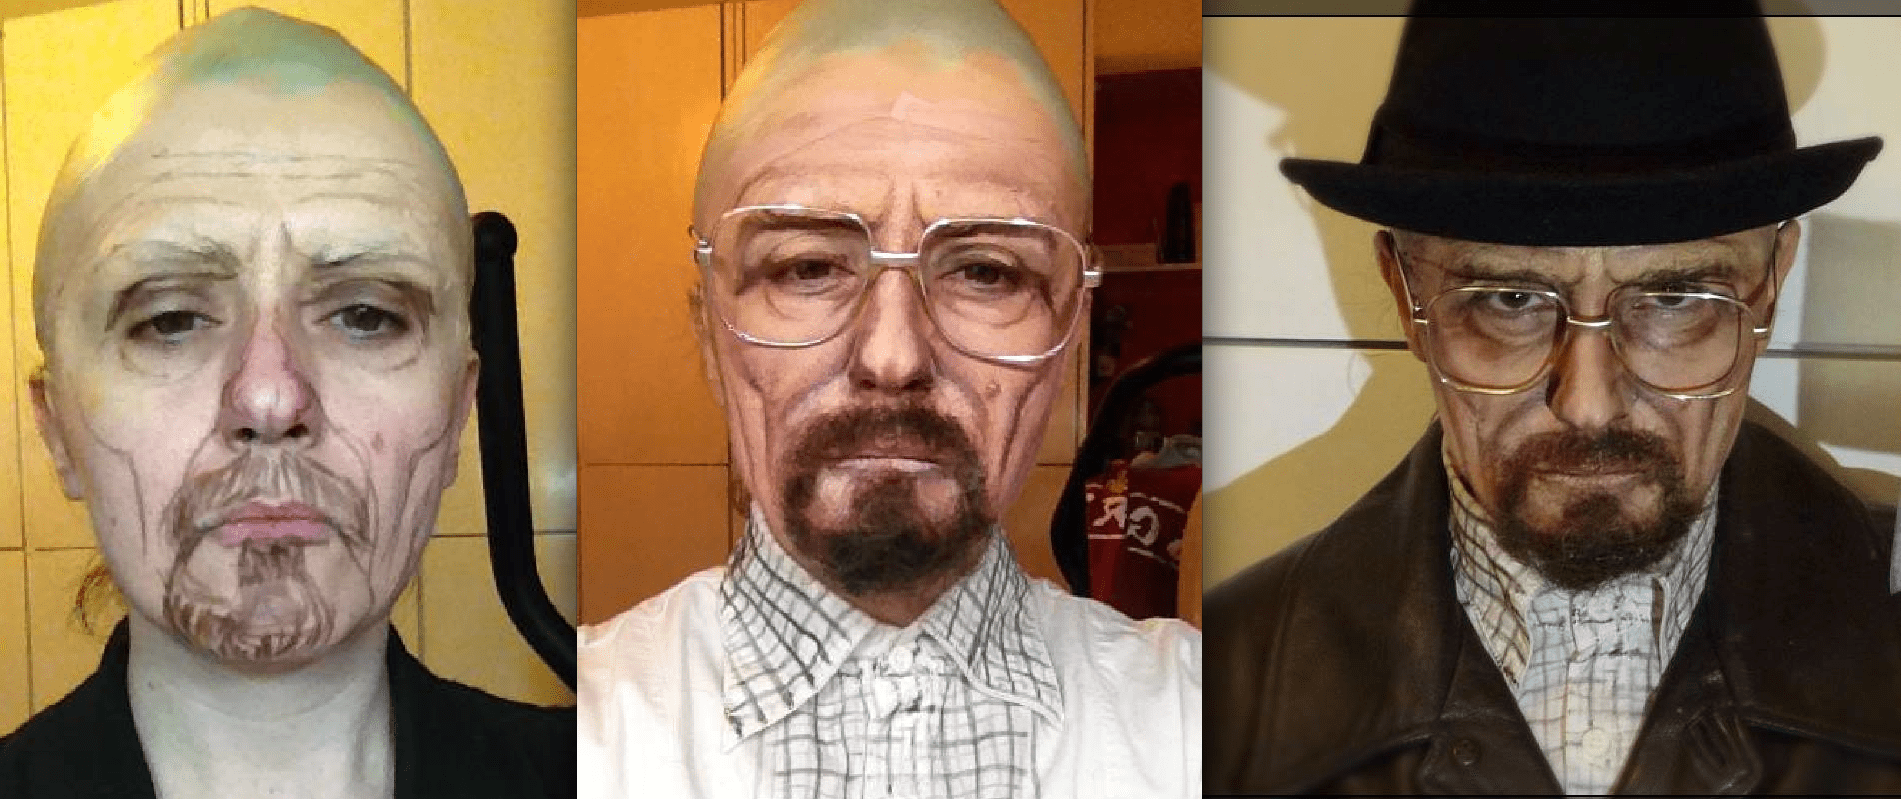 Lucia Pittalis as Bryan Cranston's character Walter White in Breaking Bad